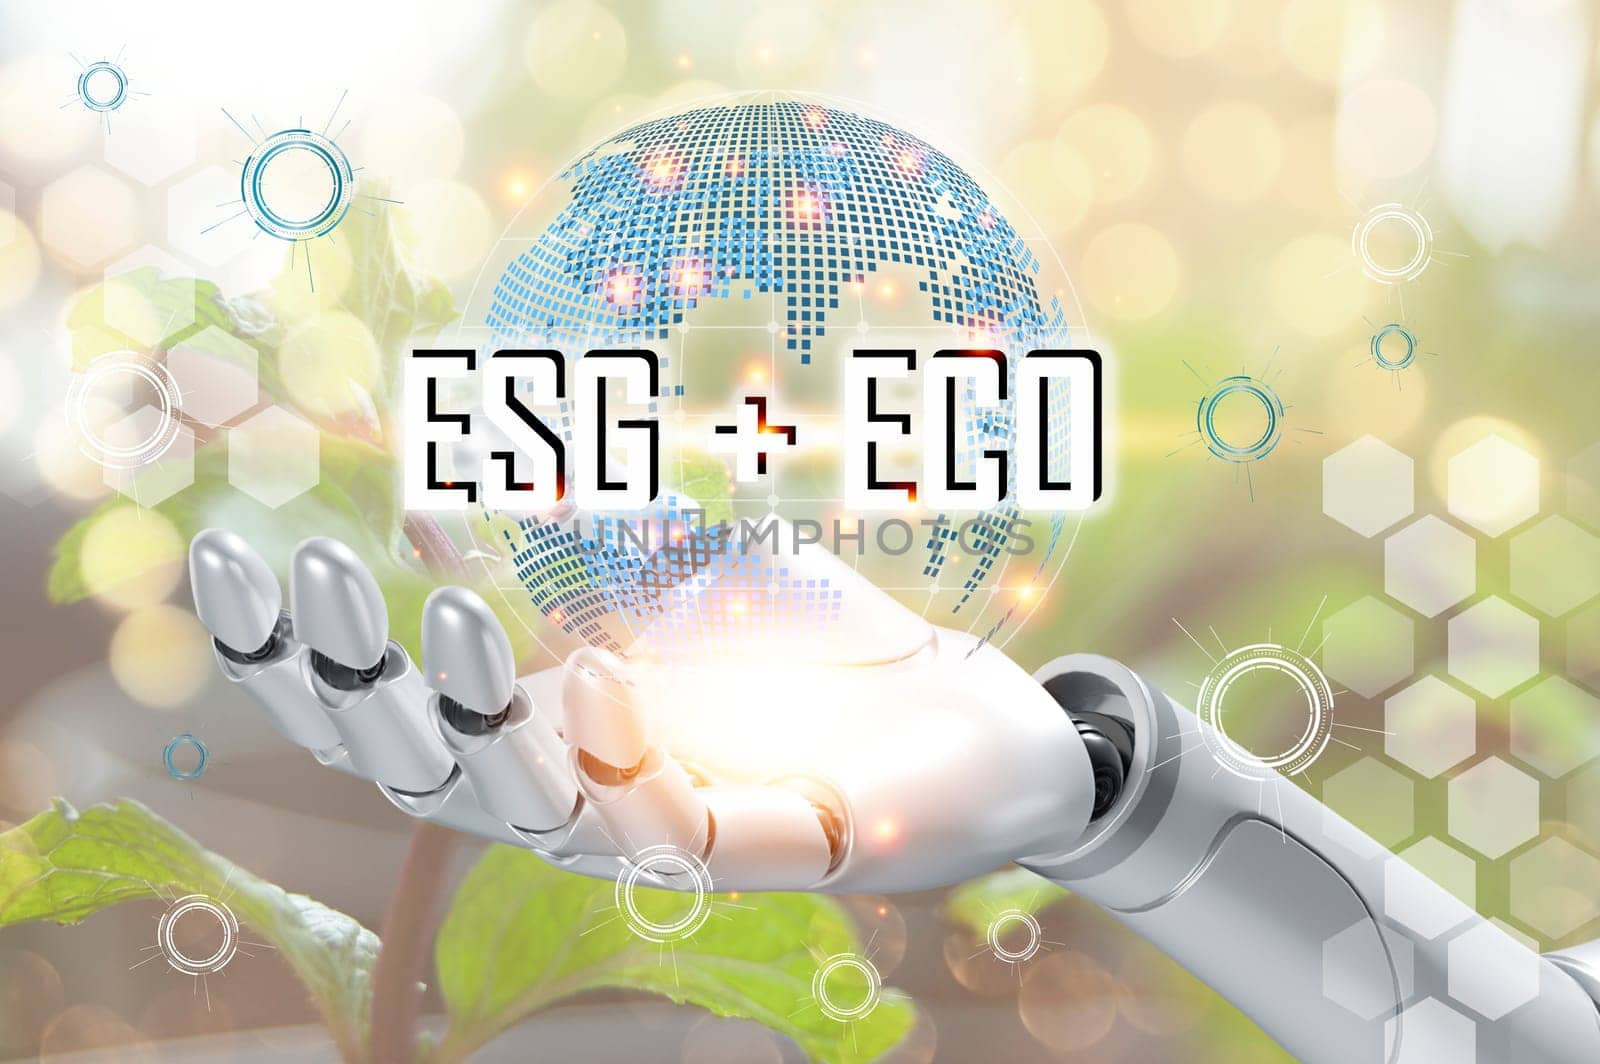 The concept is to combine ESG and ECO systems with artificial intelligence to optimize efficiency.